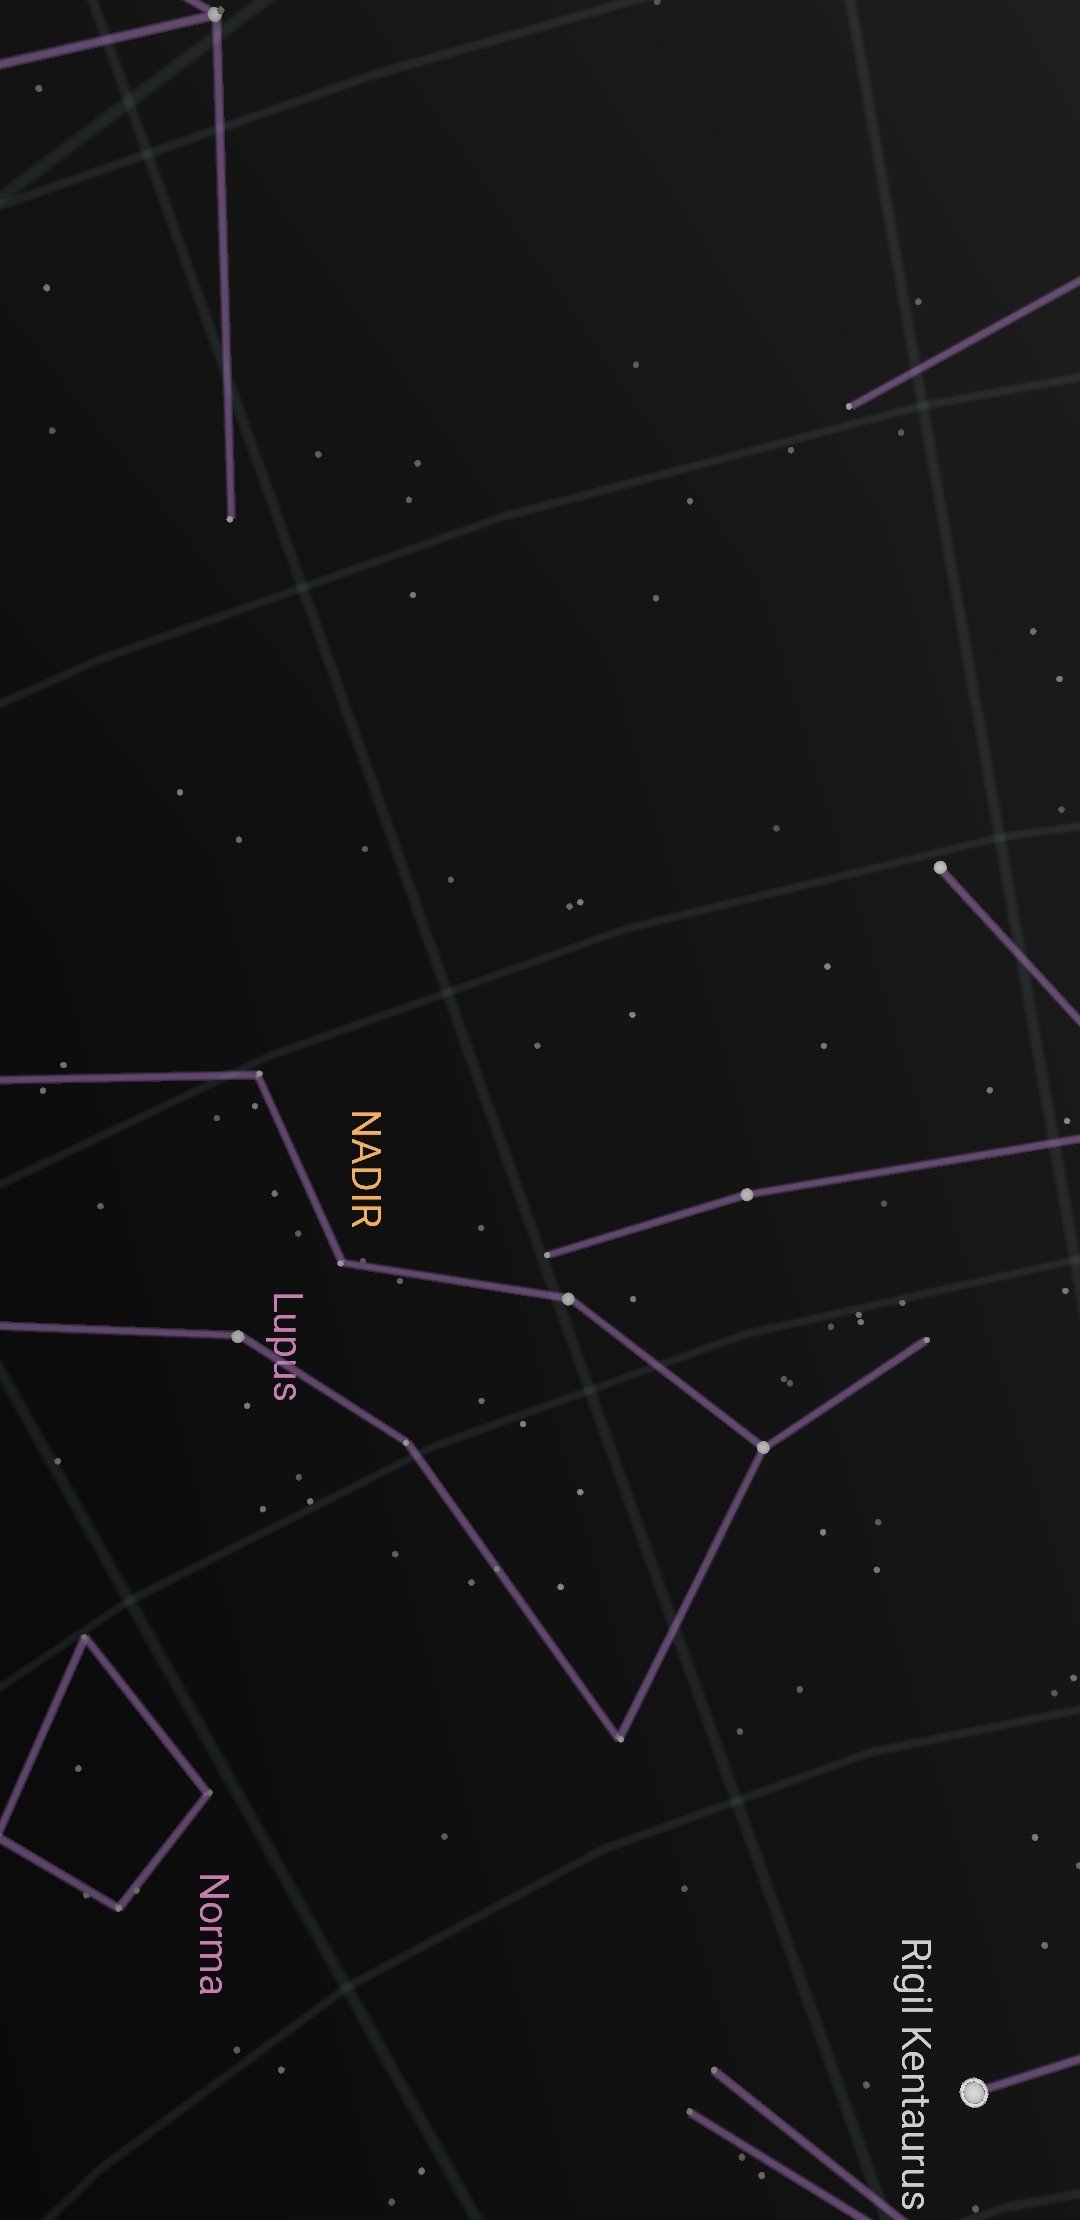 google sky map not accurate